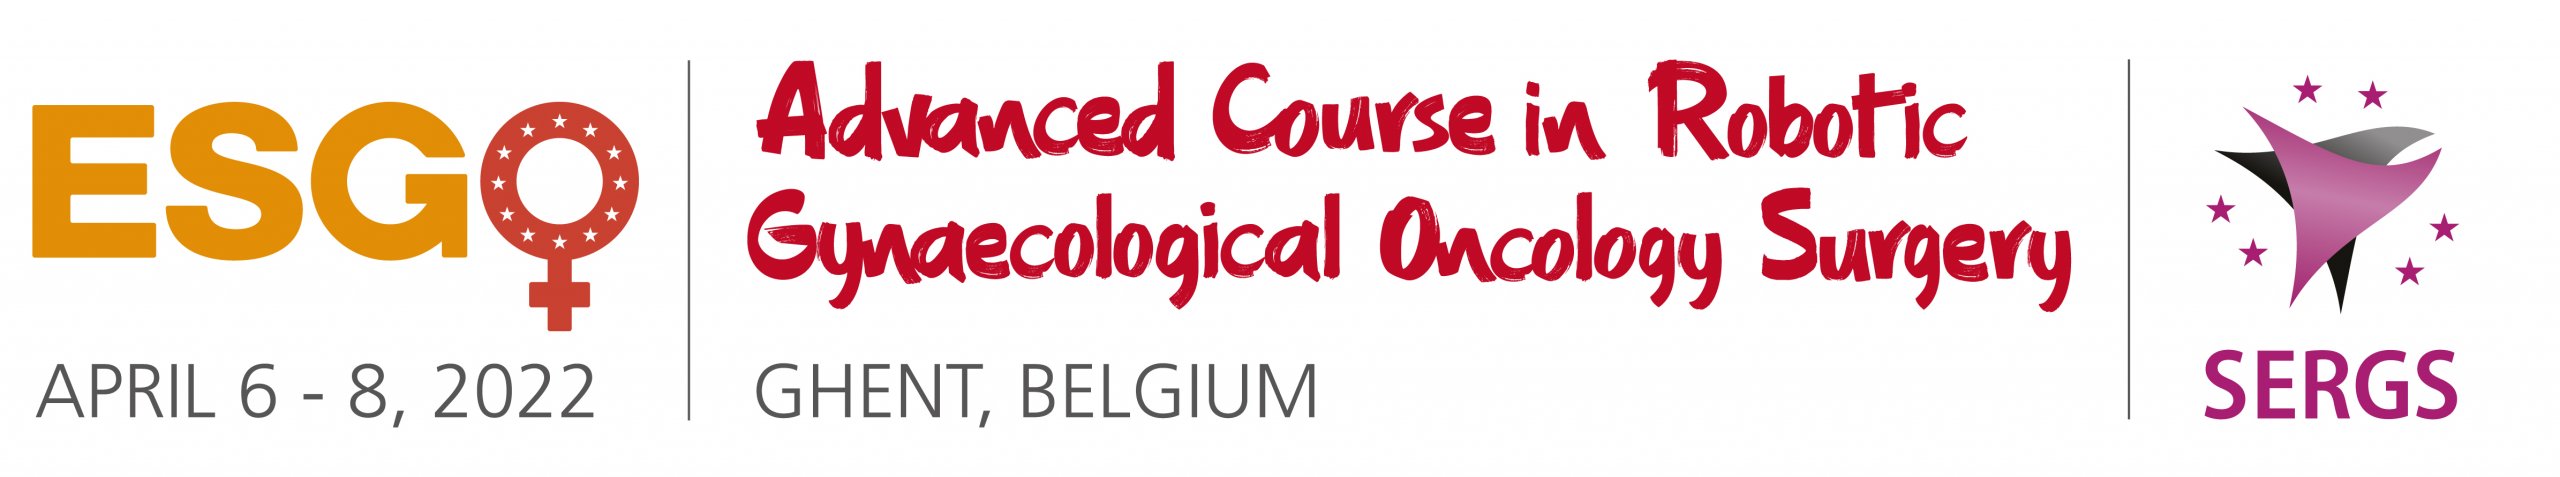 ESGO – SERGS Advanced Course in Robotic Gynaecological Oncology Surgery_New date-01-01